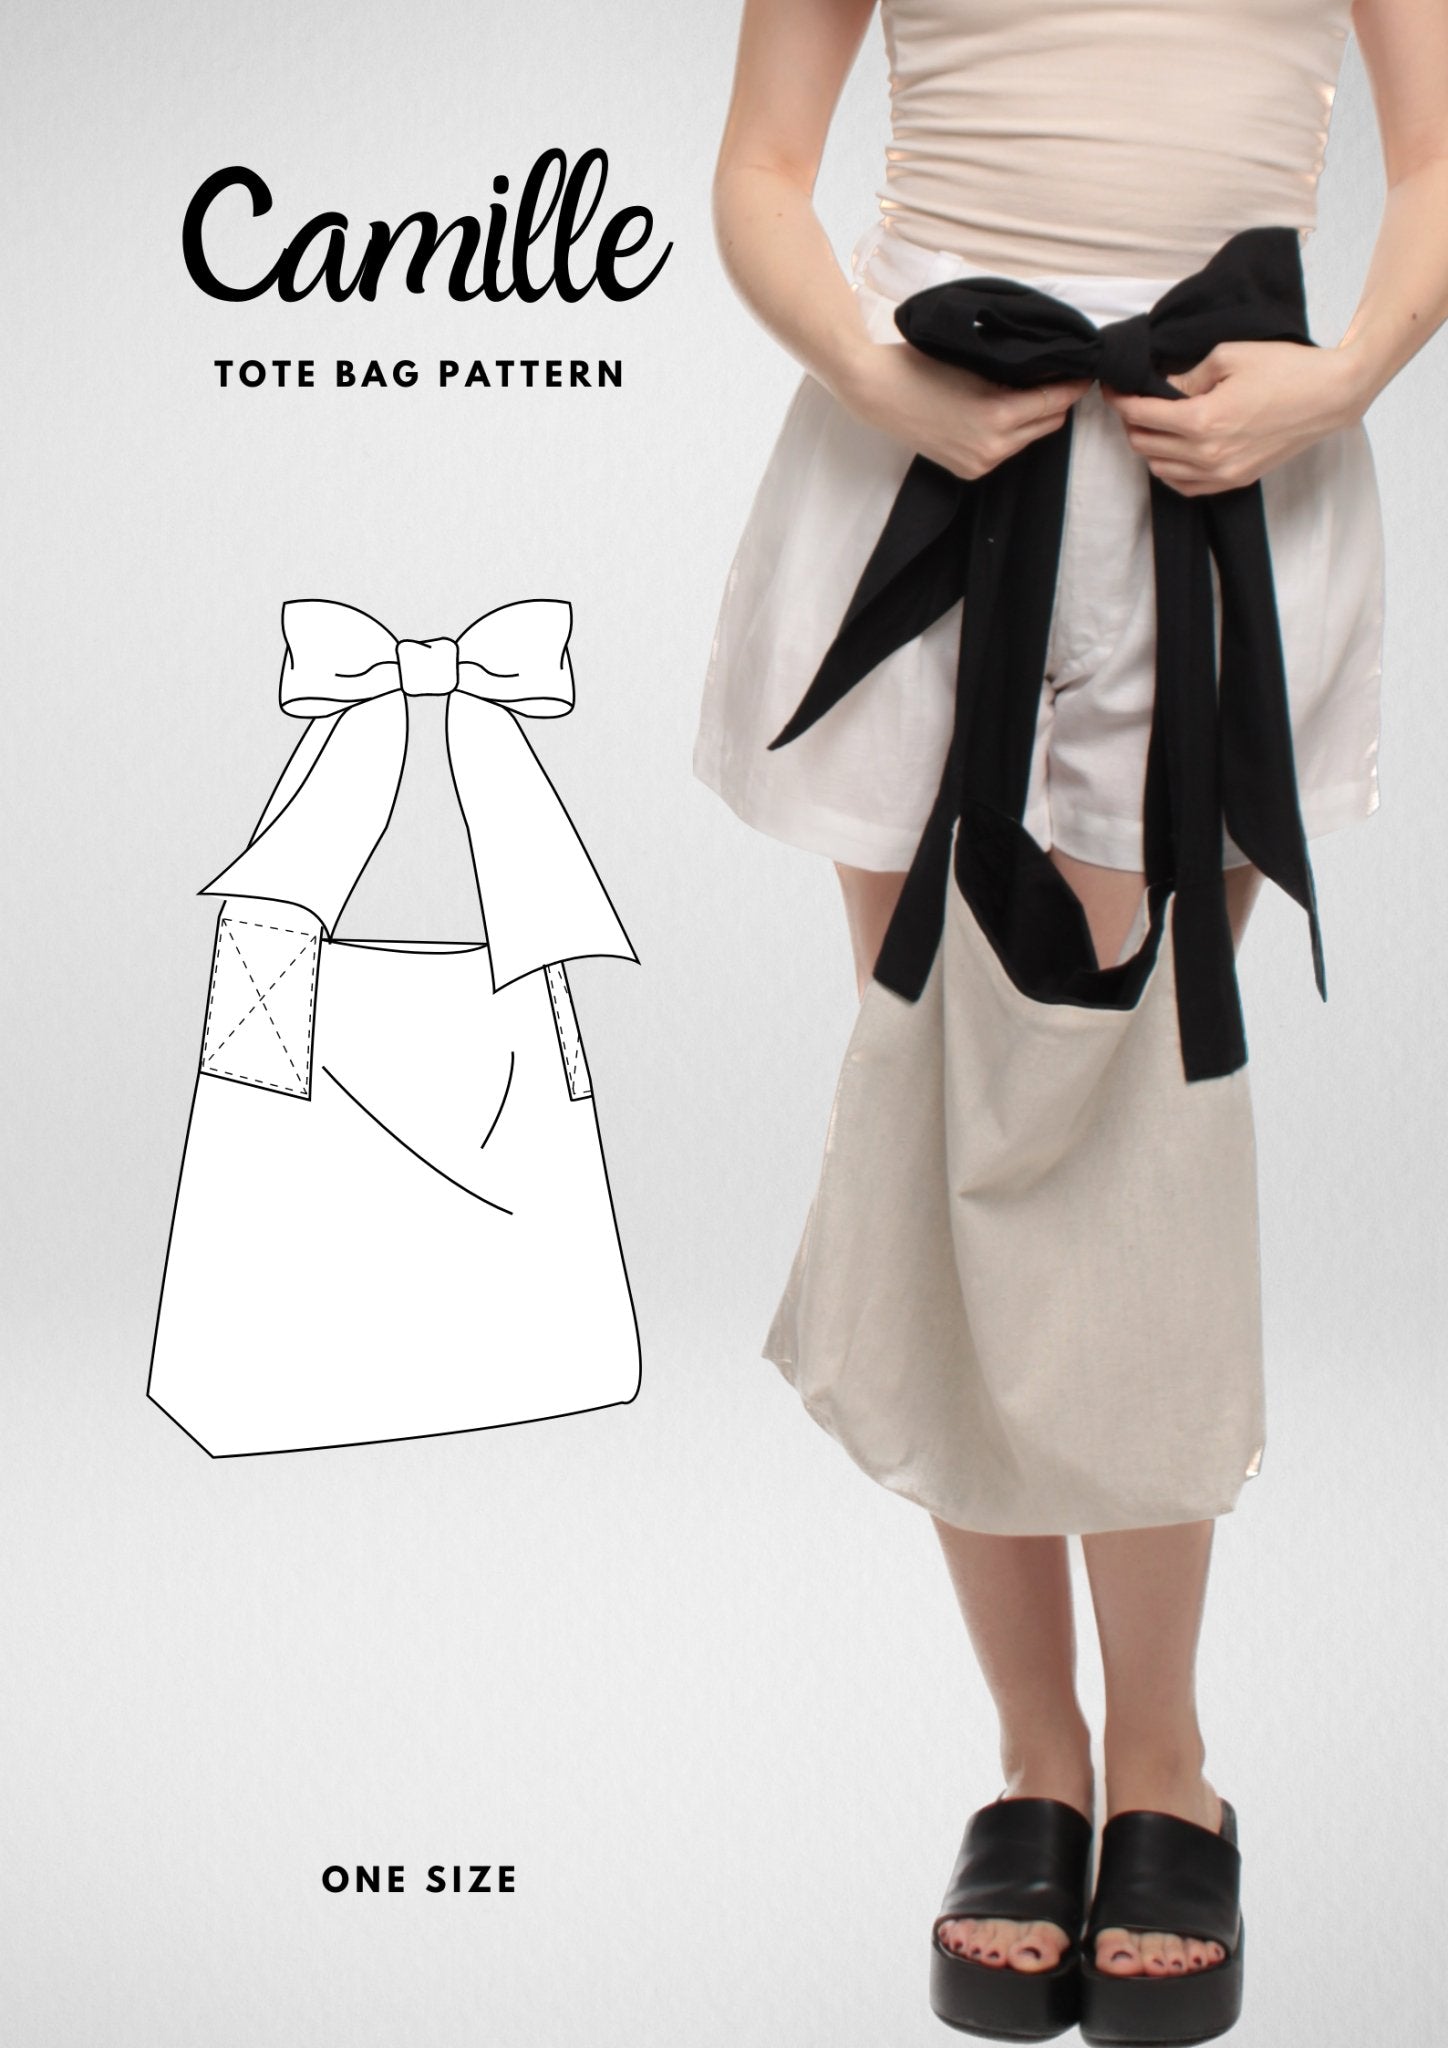 How To Sew The Bow Tote Bag Sewing Pattern - Friedlies